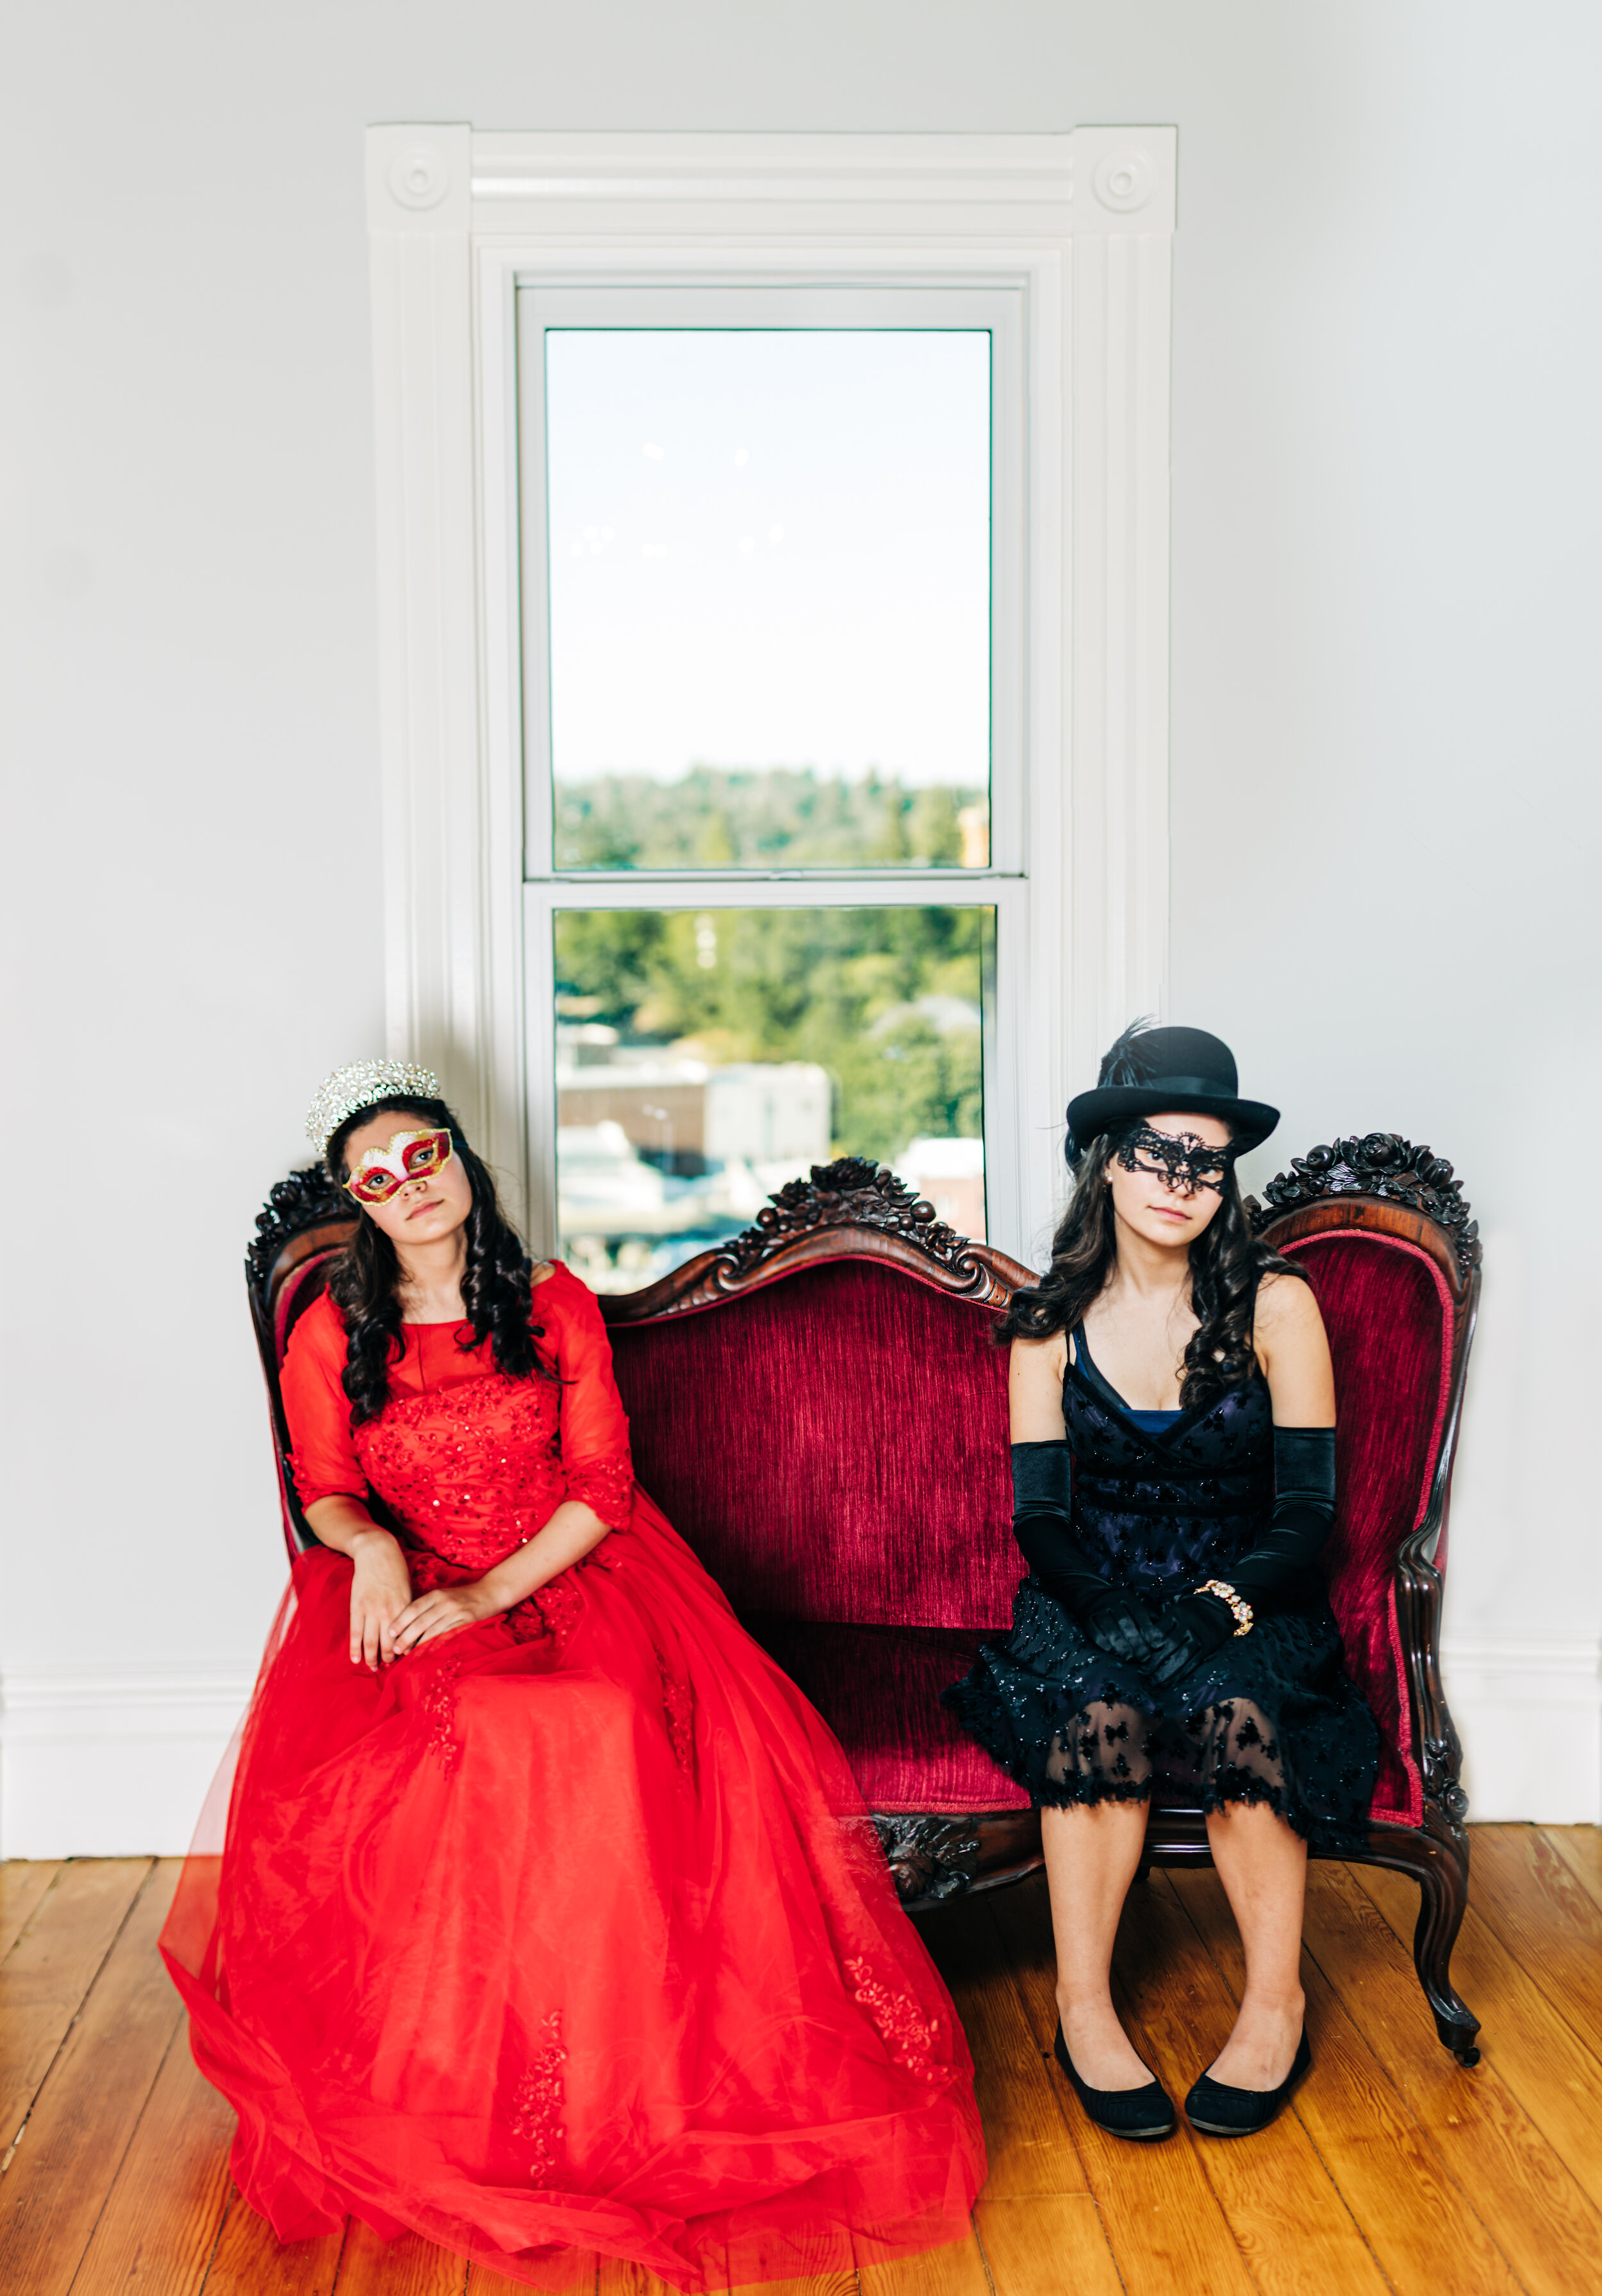 Alice and the Red Queen with Anika Vodicka | Photo by Lenka Vodicka of Lenkaland Photography